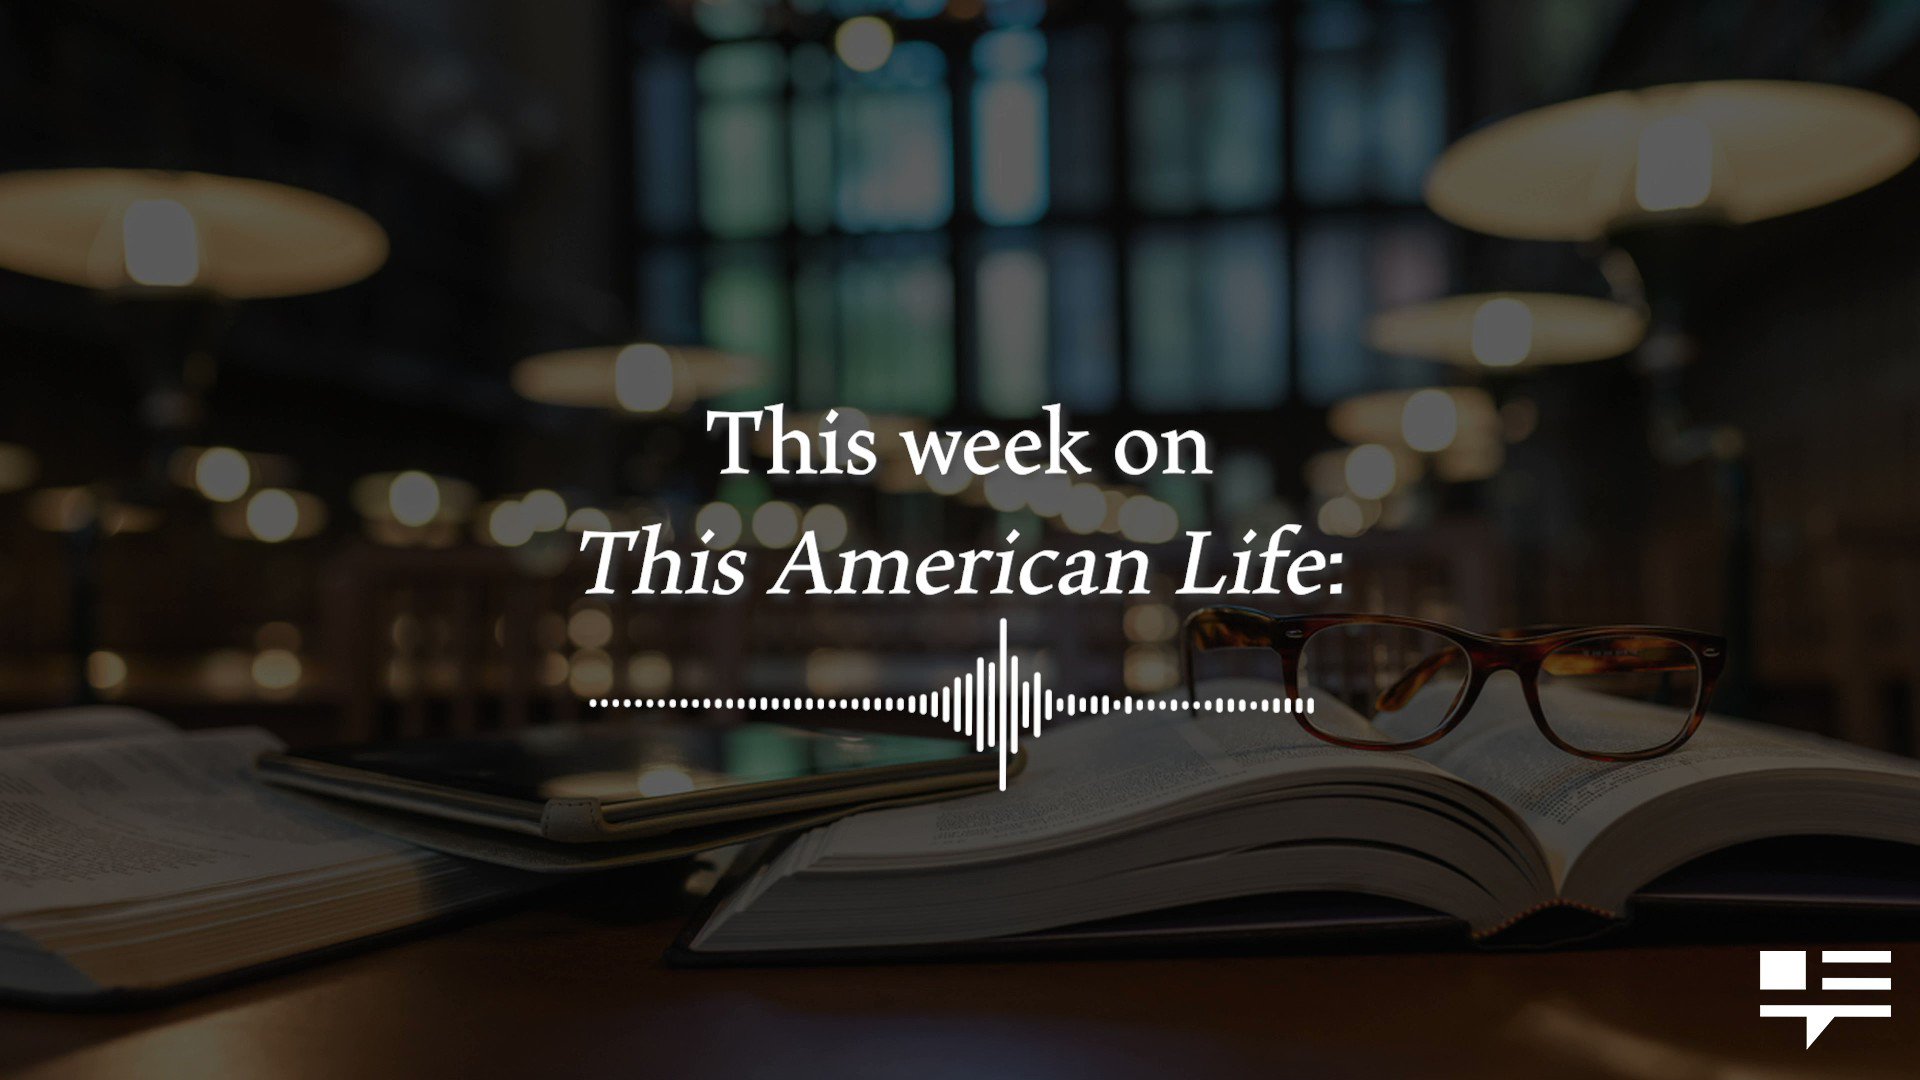 Videos - This American Life